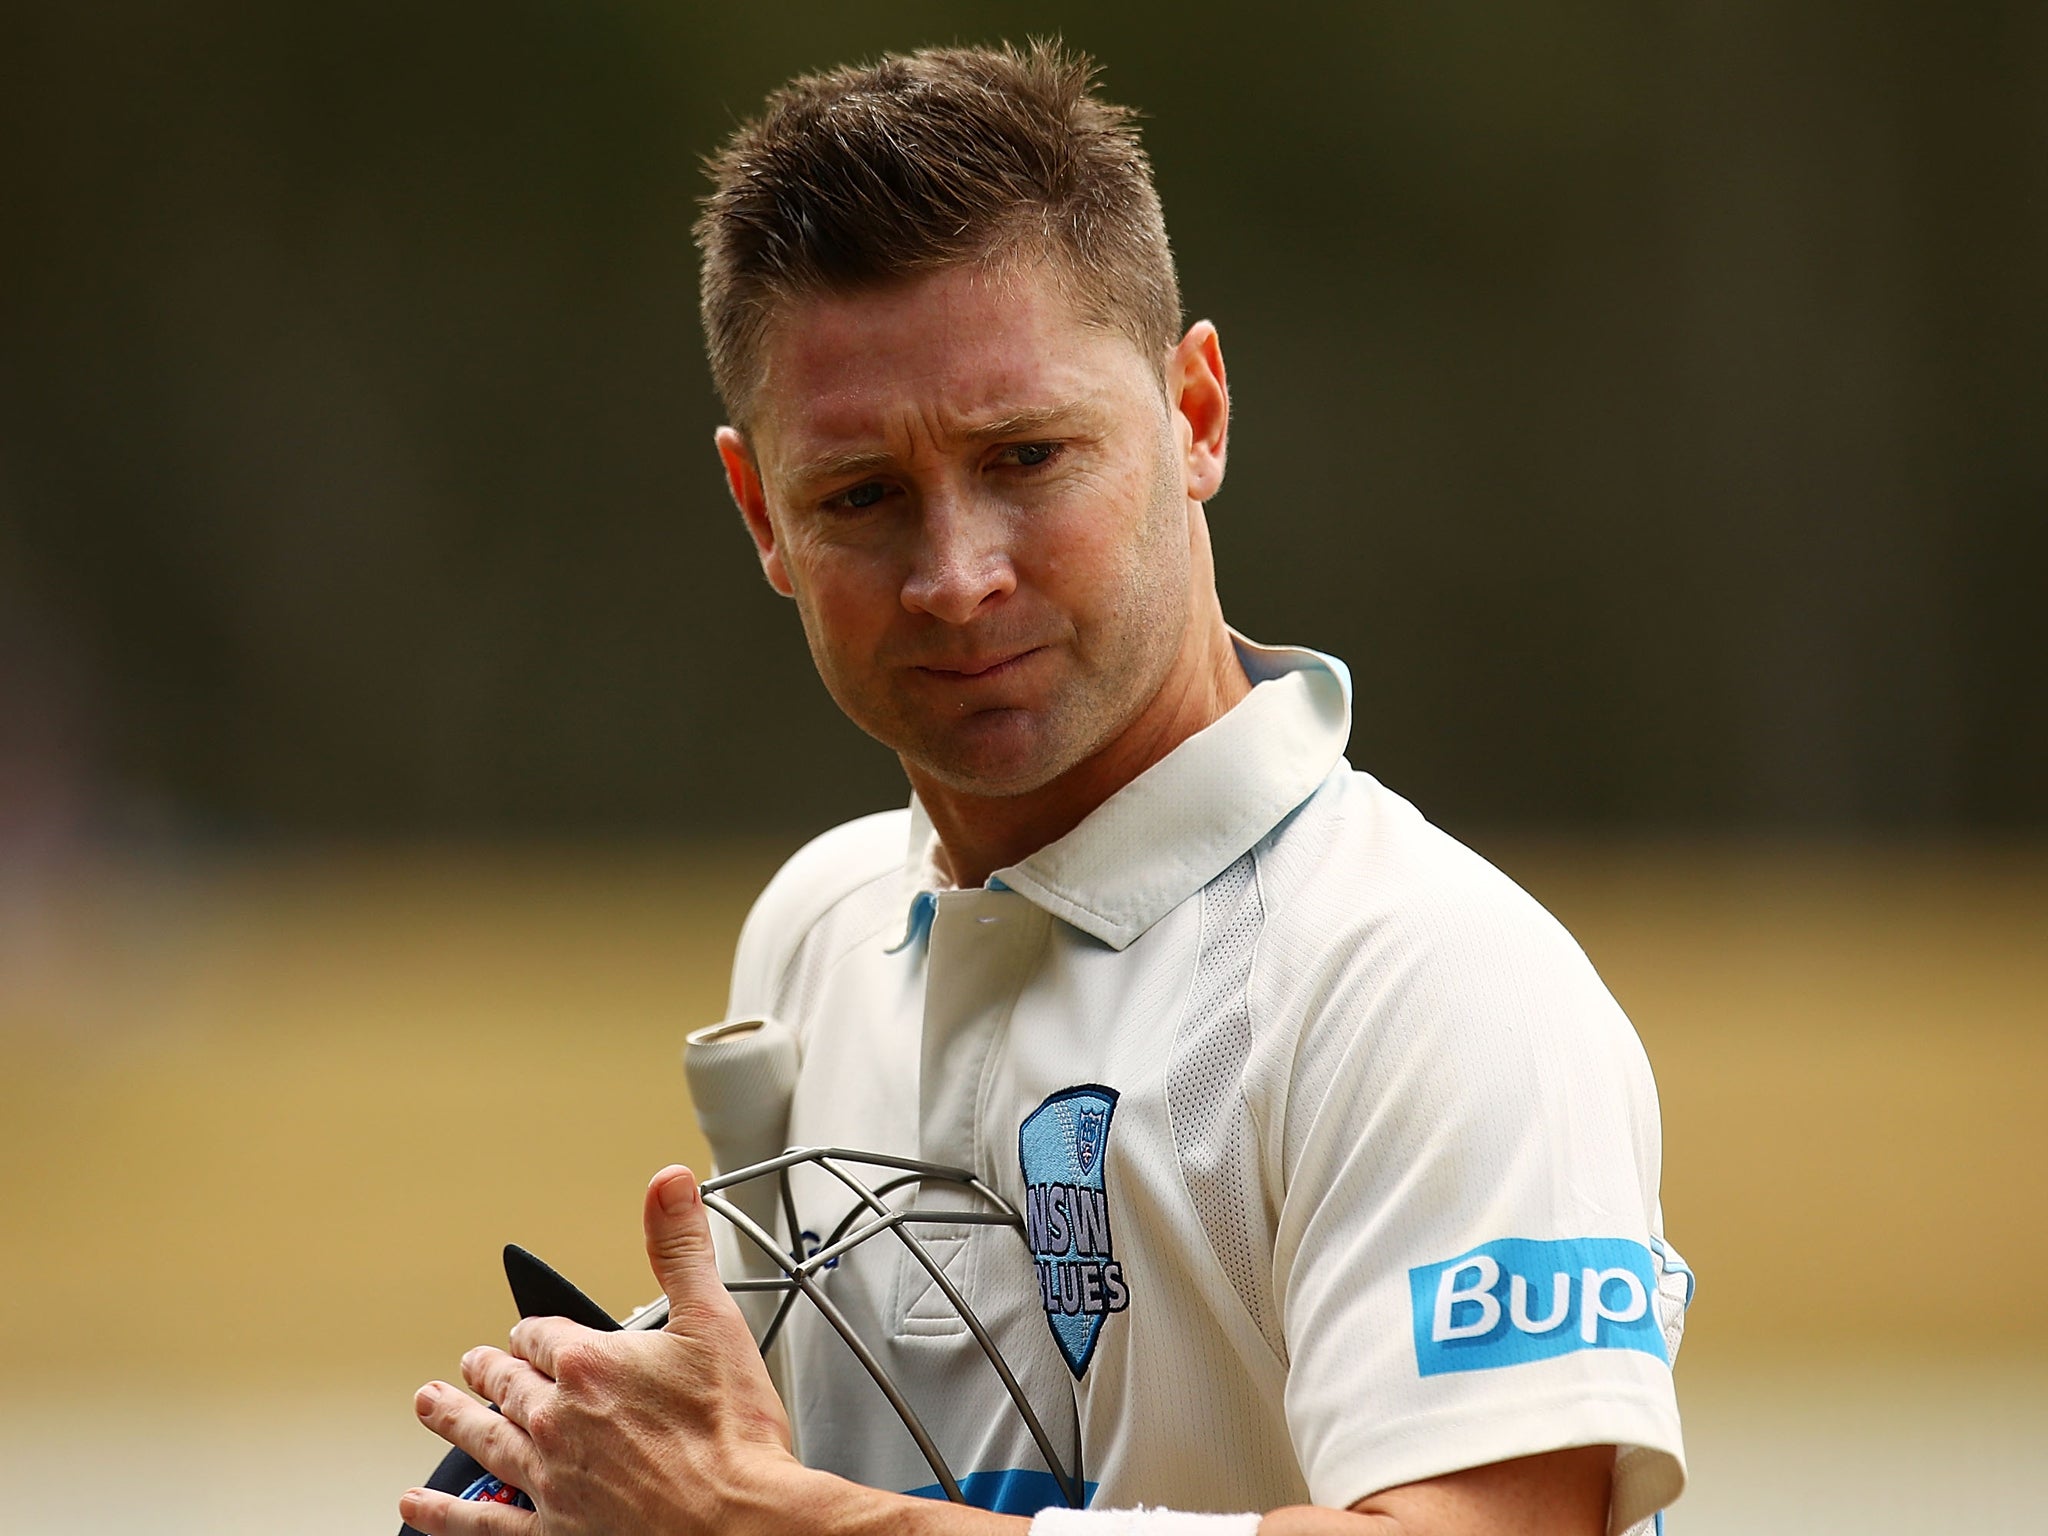 Australia captain Michael Clarke has been reprimanded upon his return to cricket after a six-week injury absence